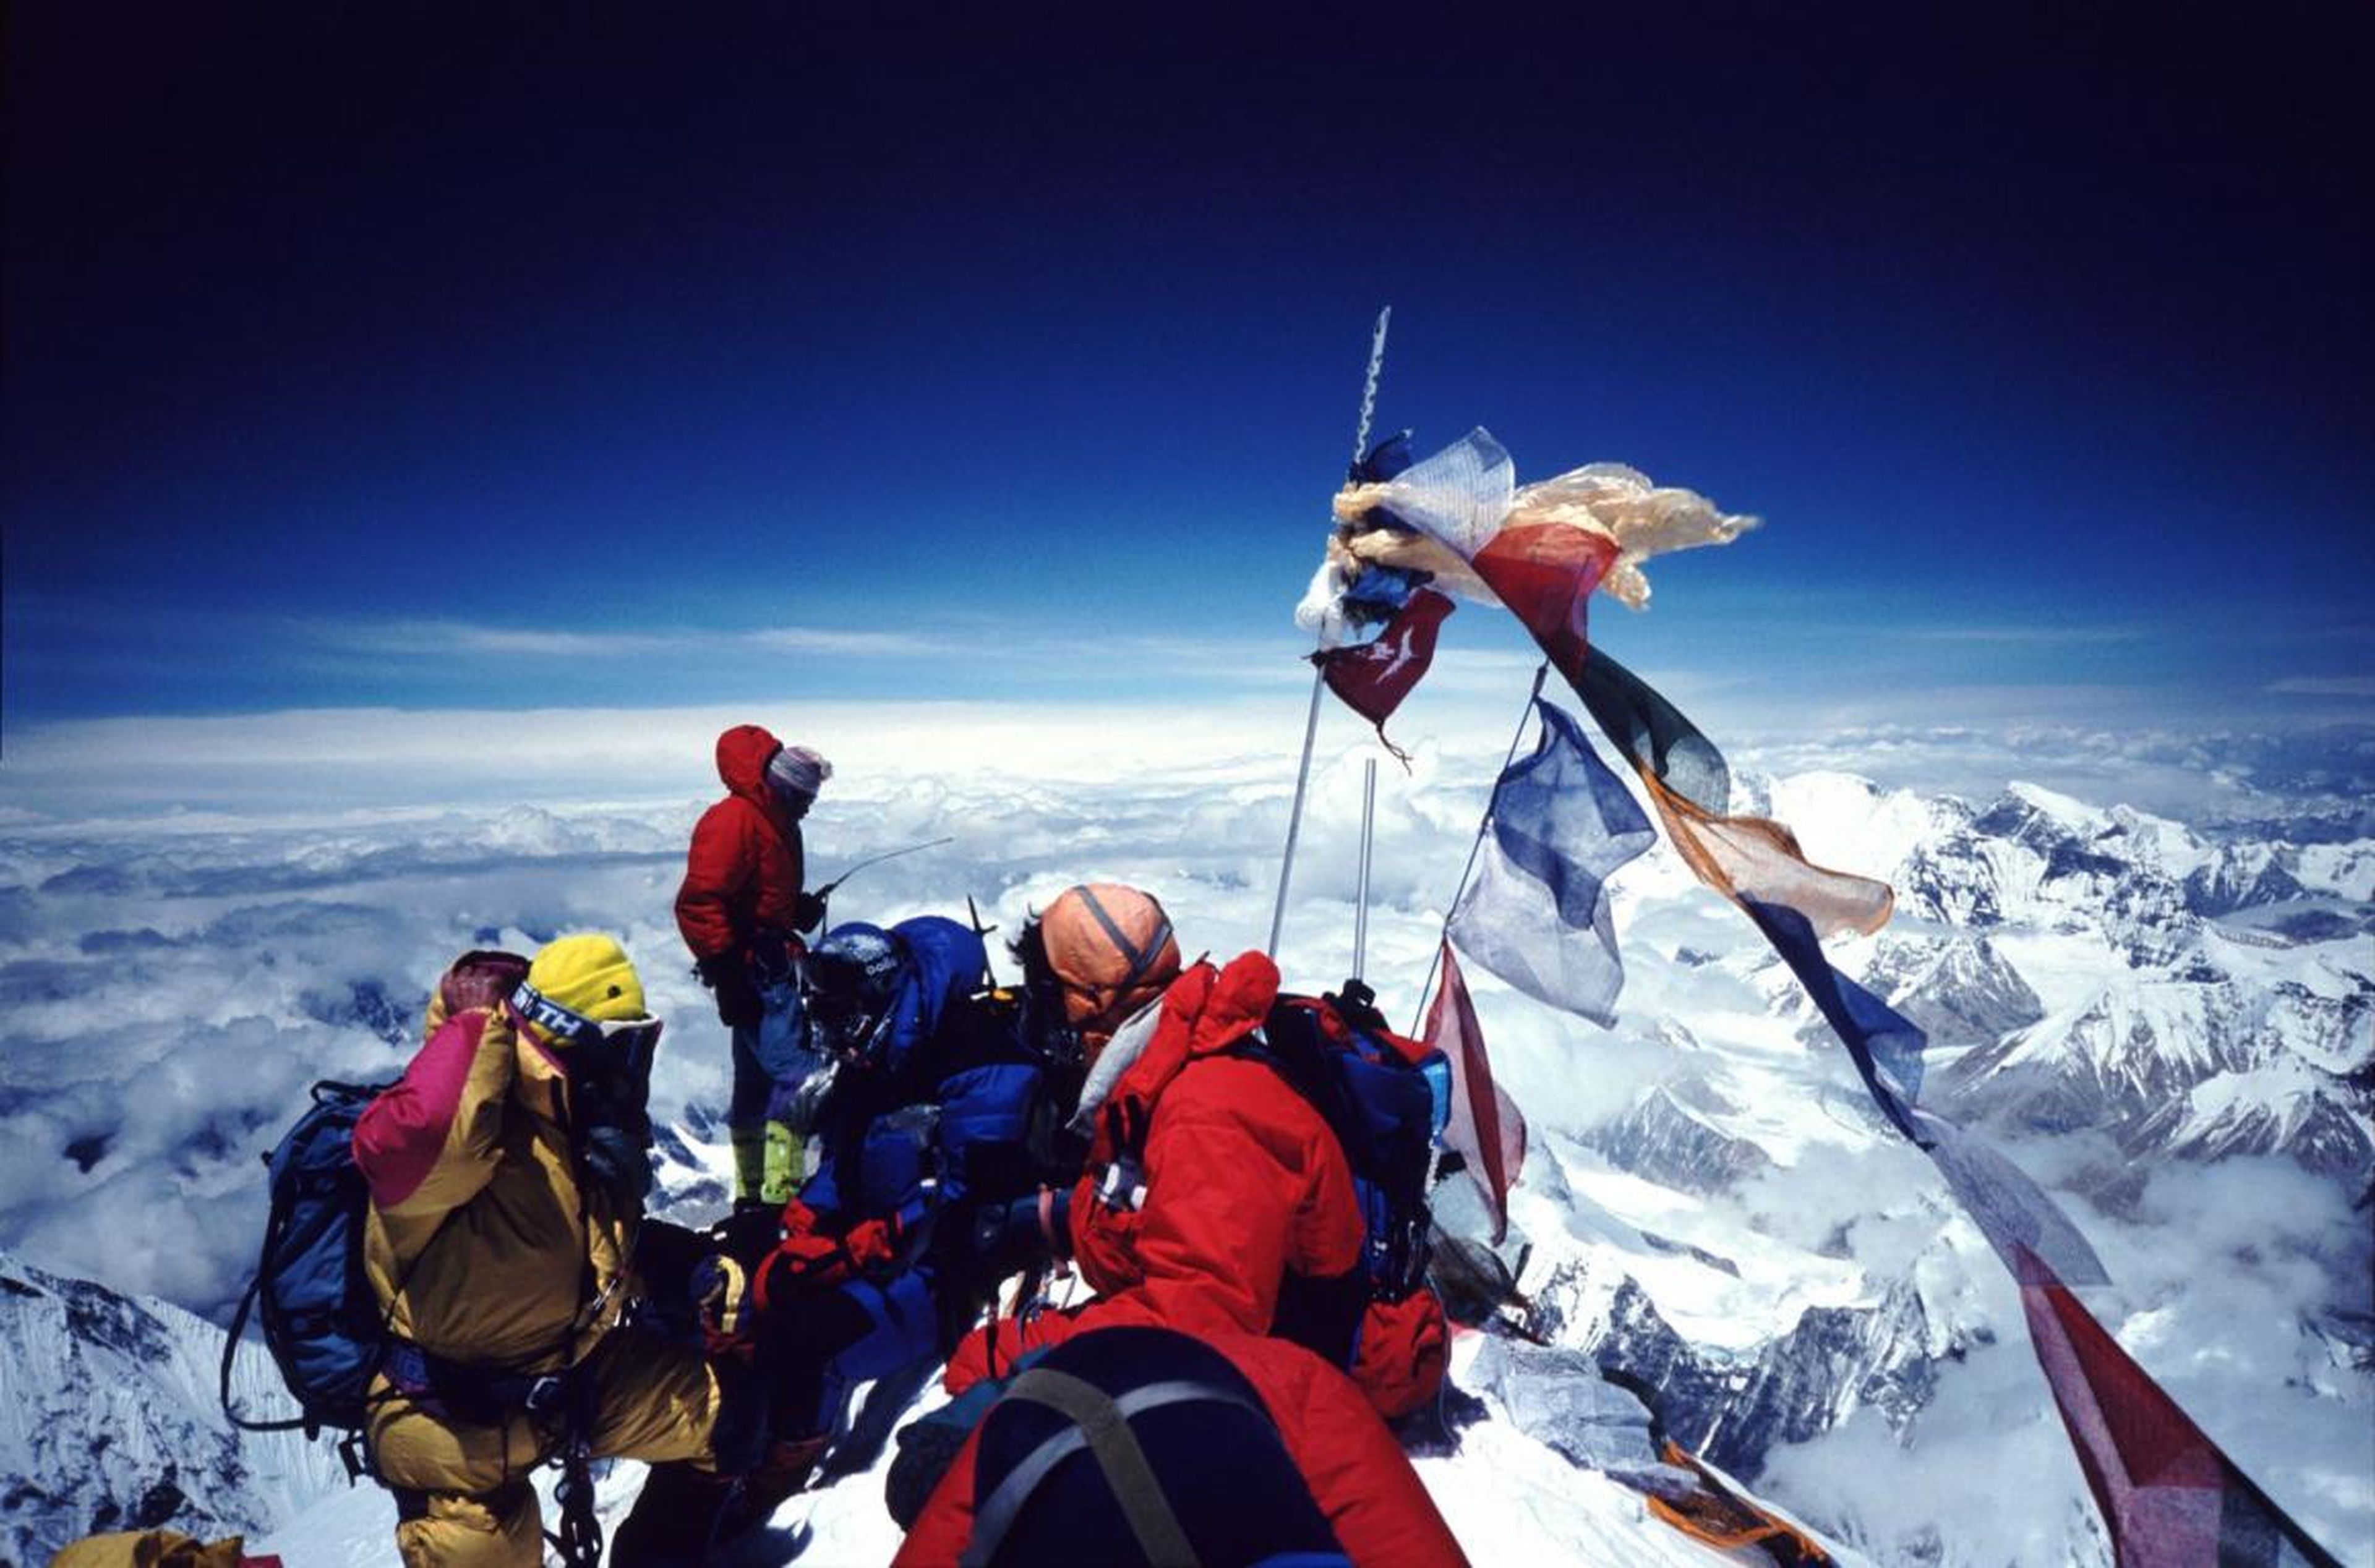 The mountain surged into hot-spot status after guides offering commercial missions became popular in the 1990s.